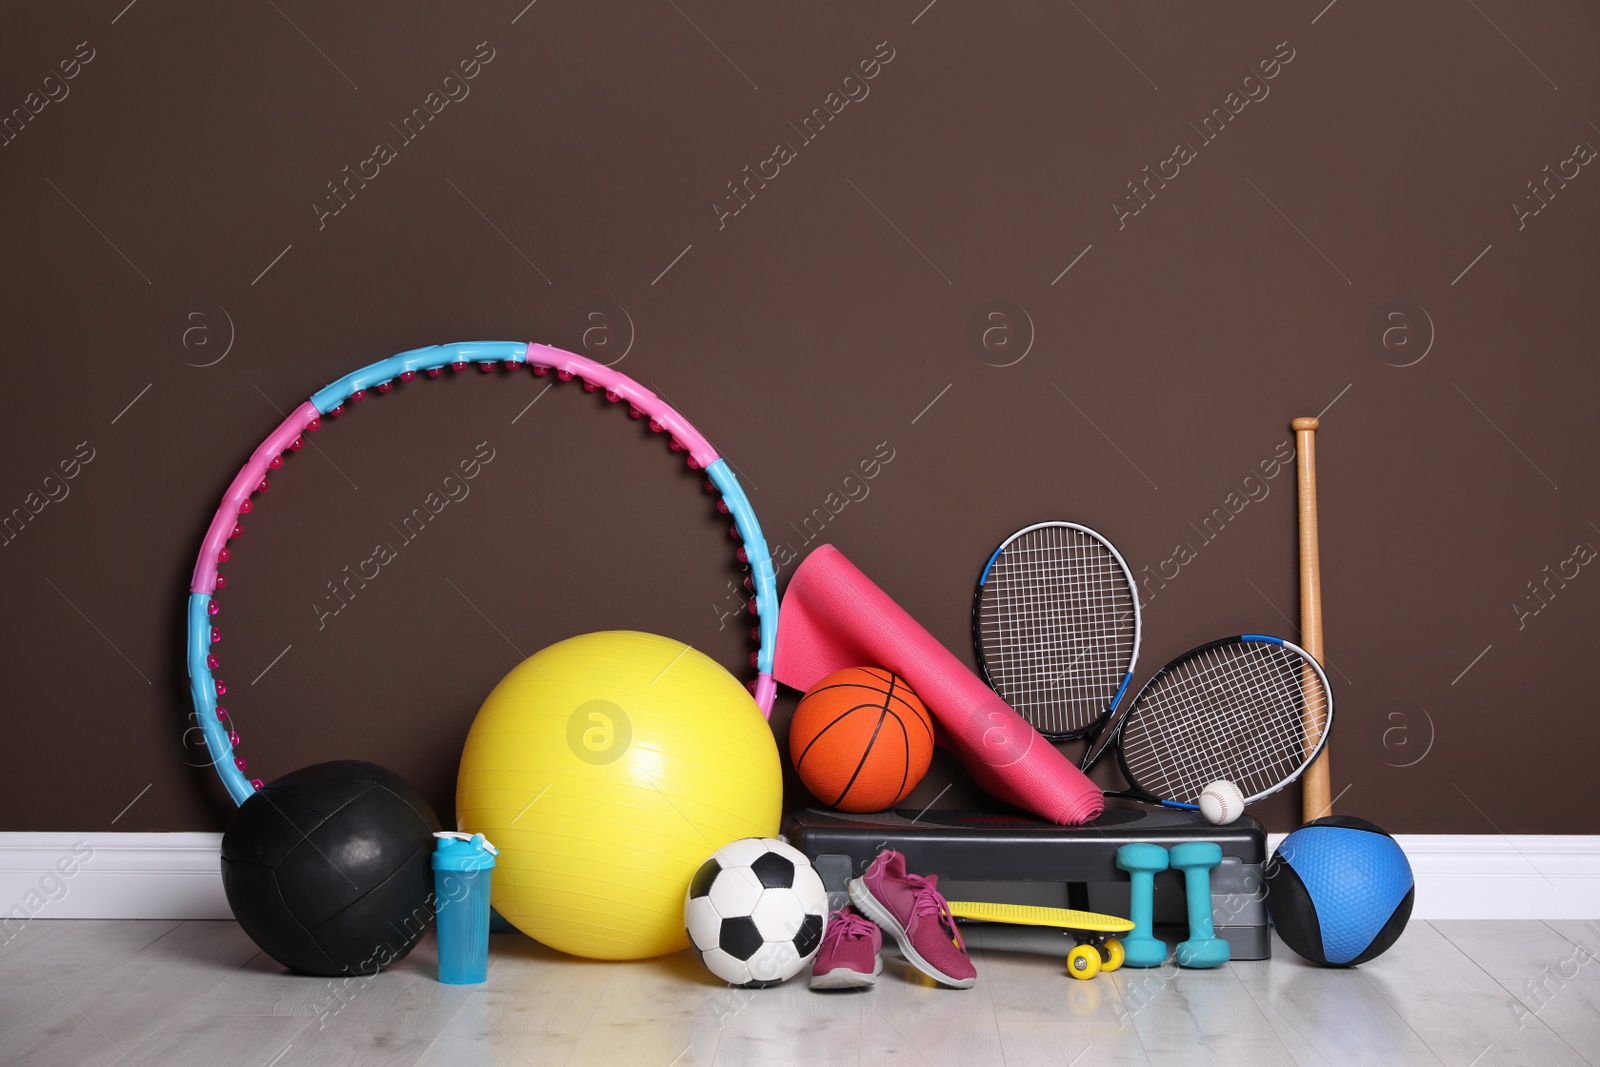 Photo of Different sports equipment near brown wall indoors